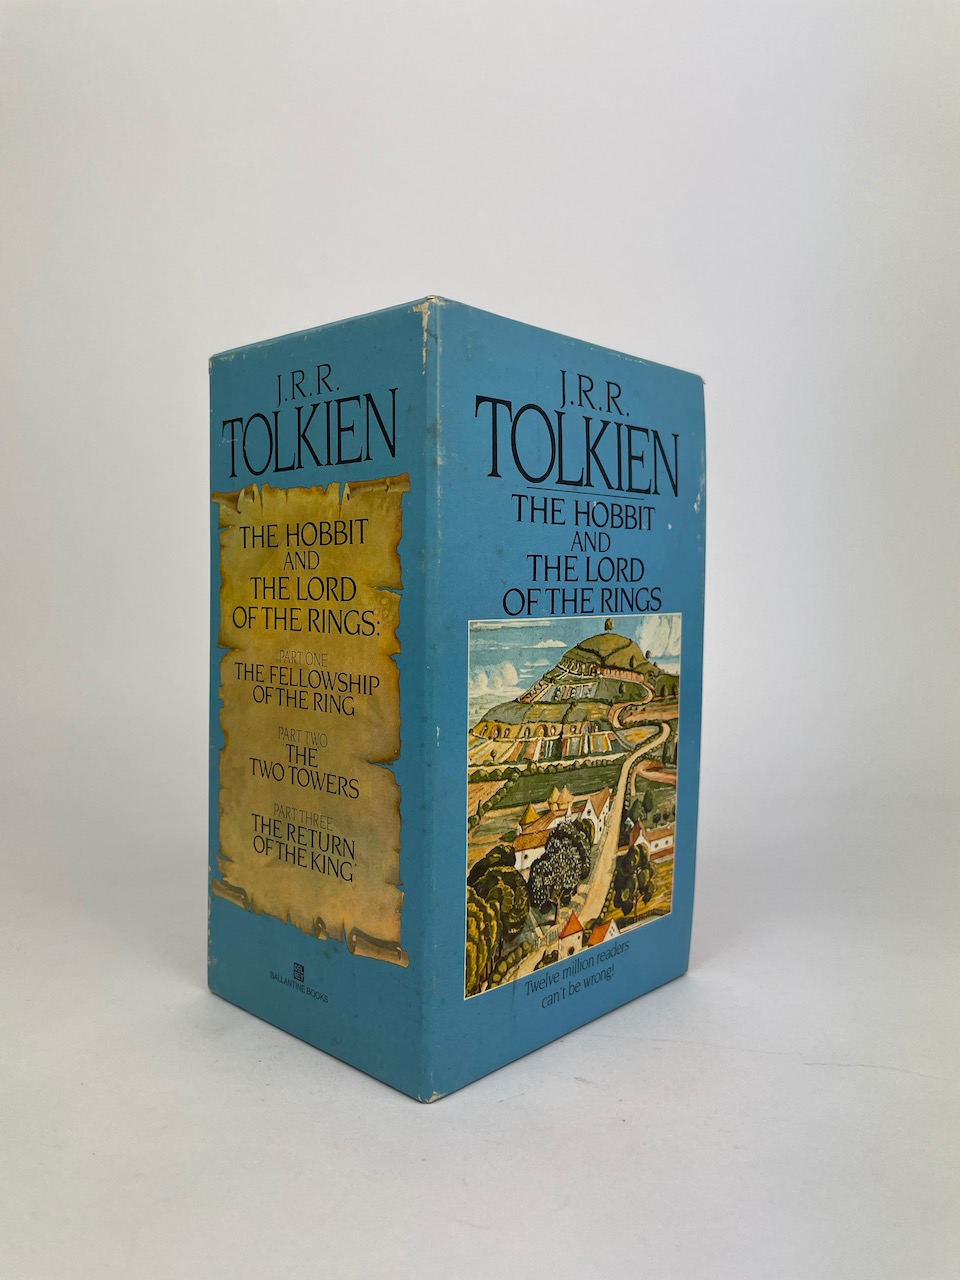 The Hobbit and The Lord of the Rings, Four Paperback Book Boxset from 1986, Blue Slipcase art by J.R.R. Tolkien 6